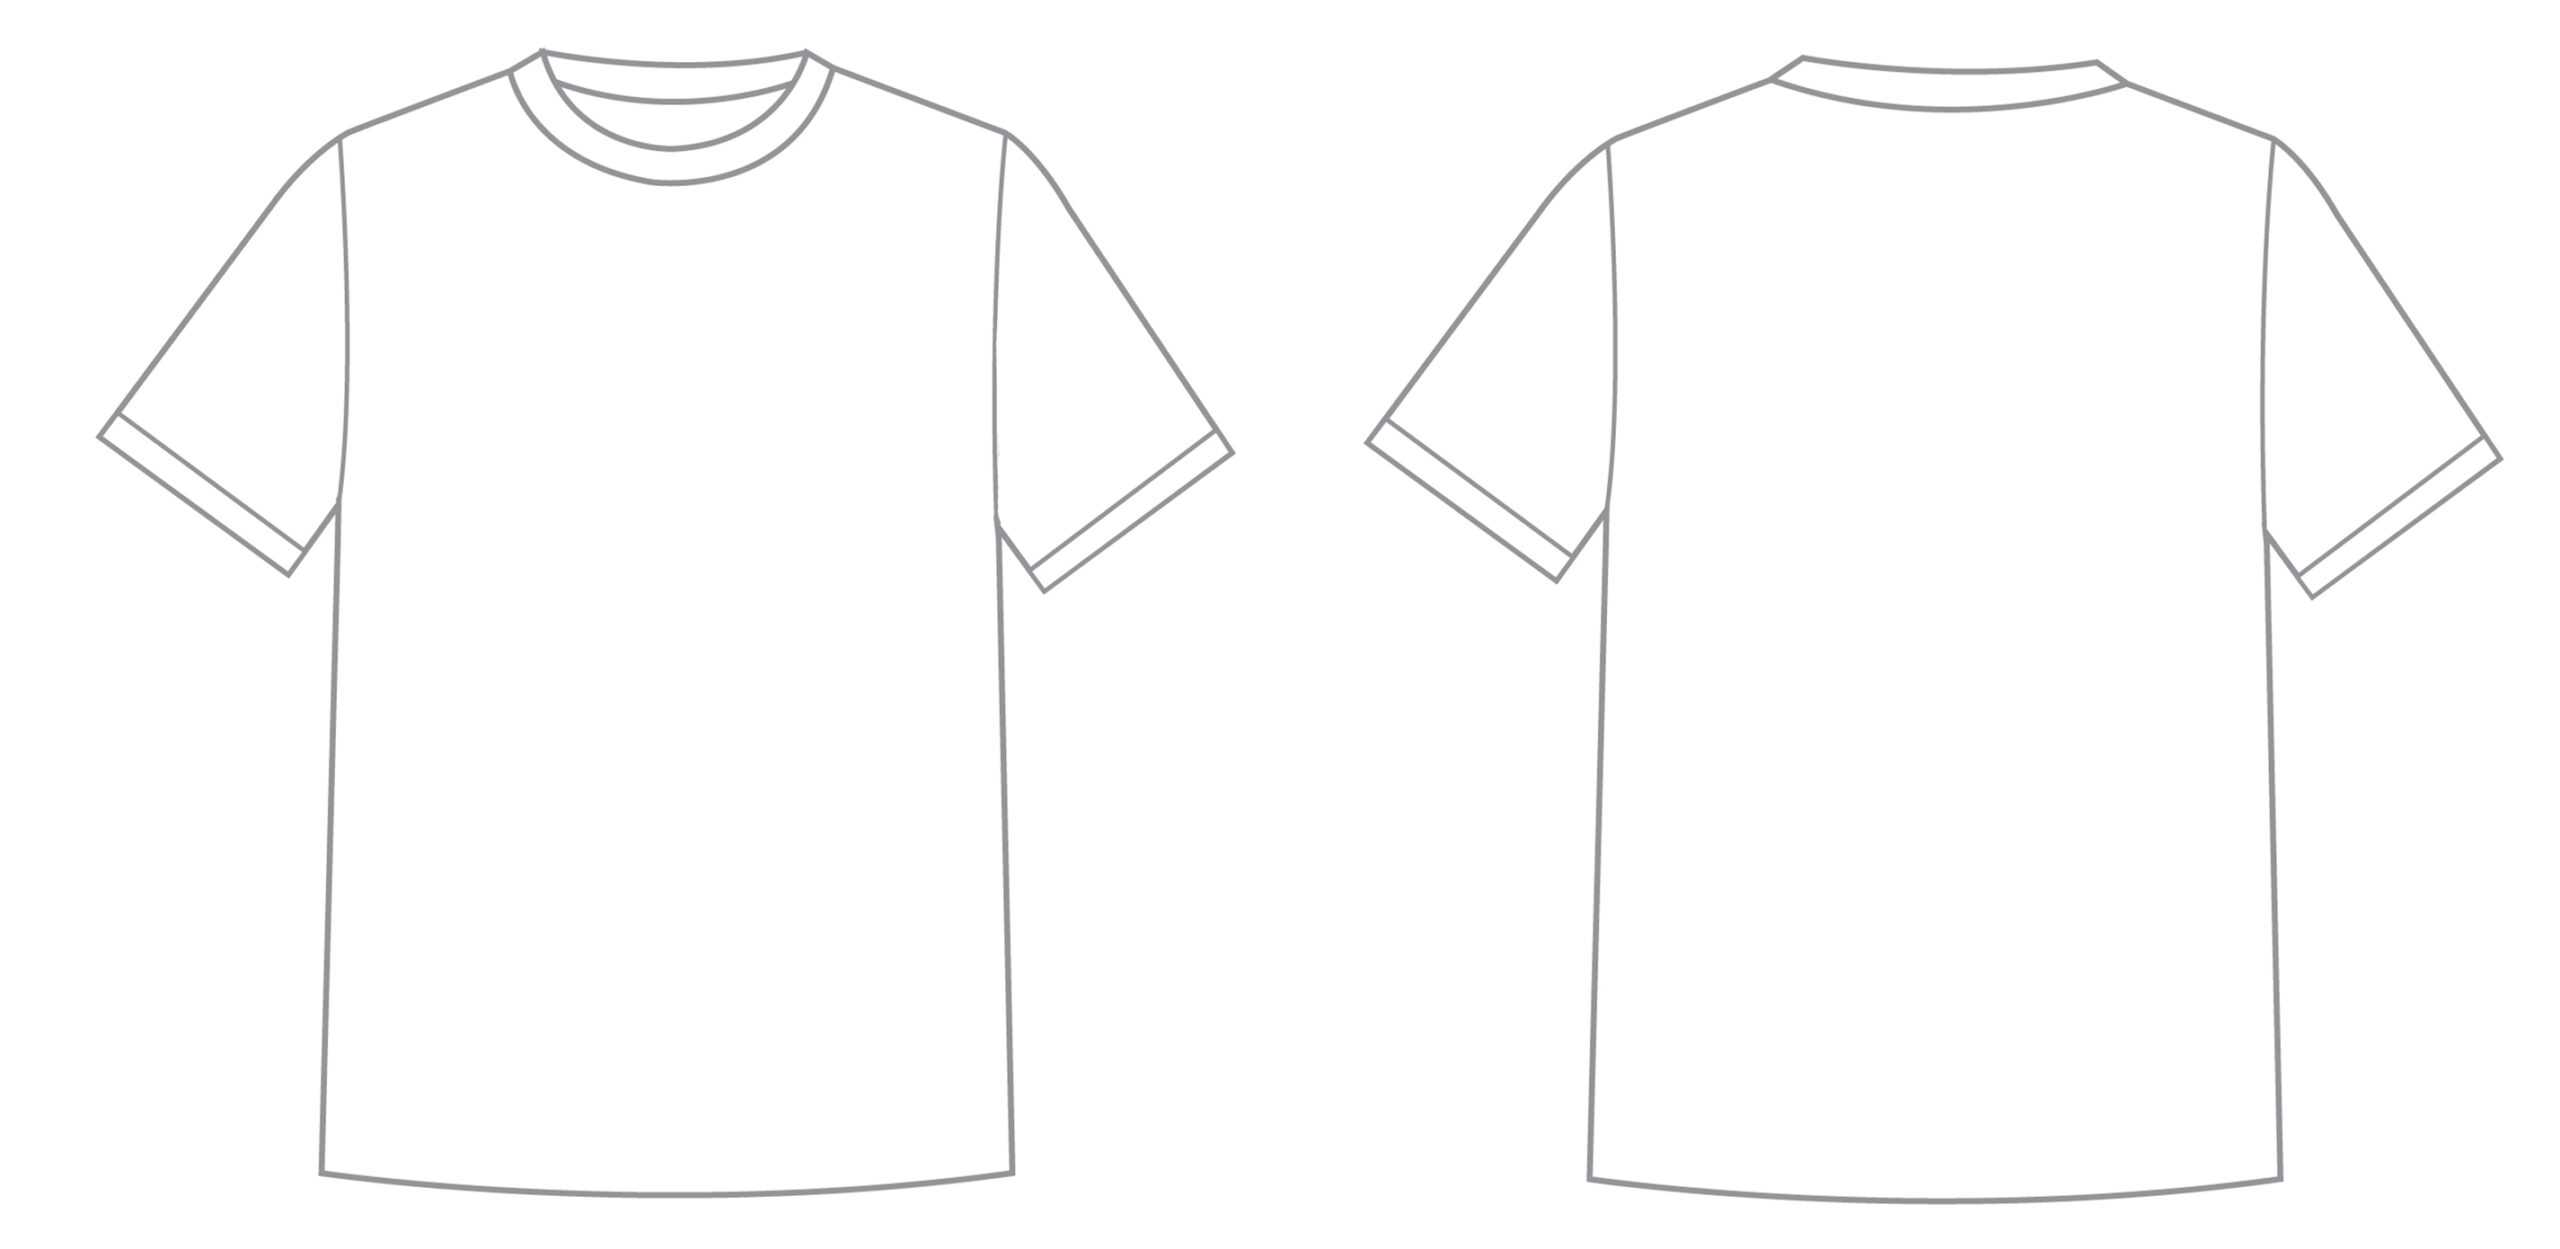 Free Tshirt Template, Download Free Clip Art, Free Clip Art Throughout Blank T Shirt Design Template Psd